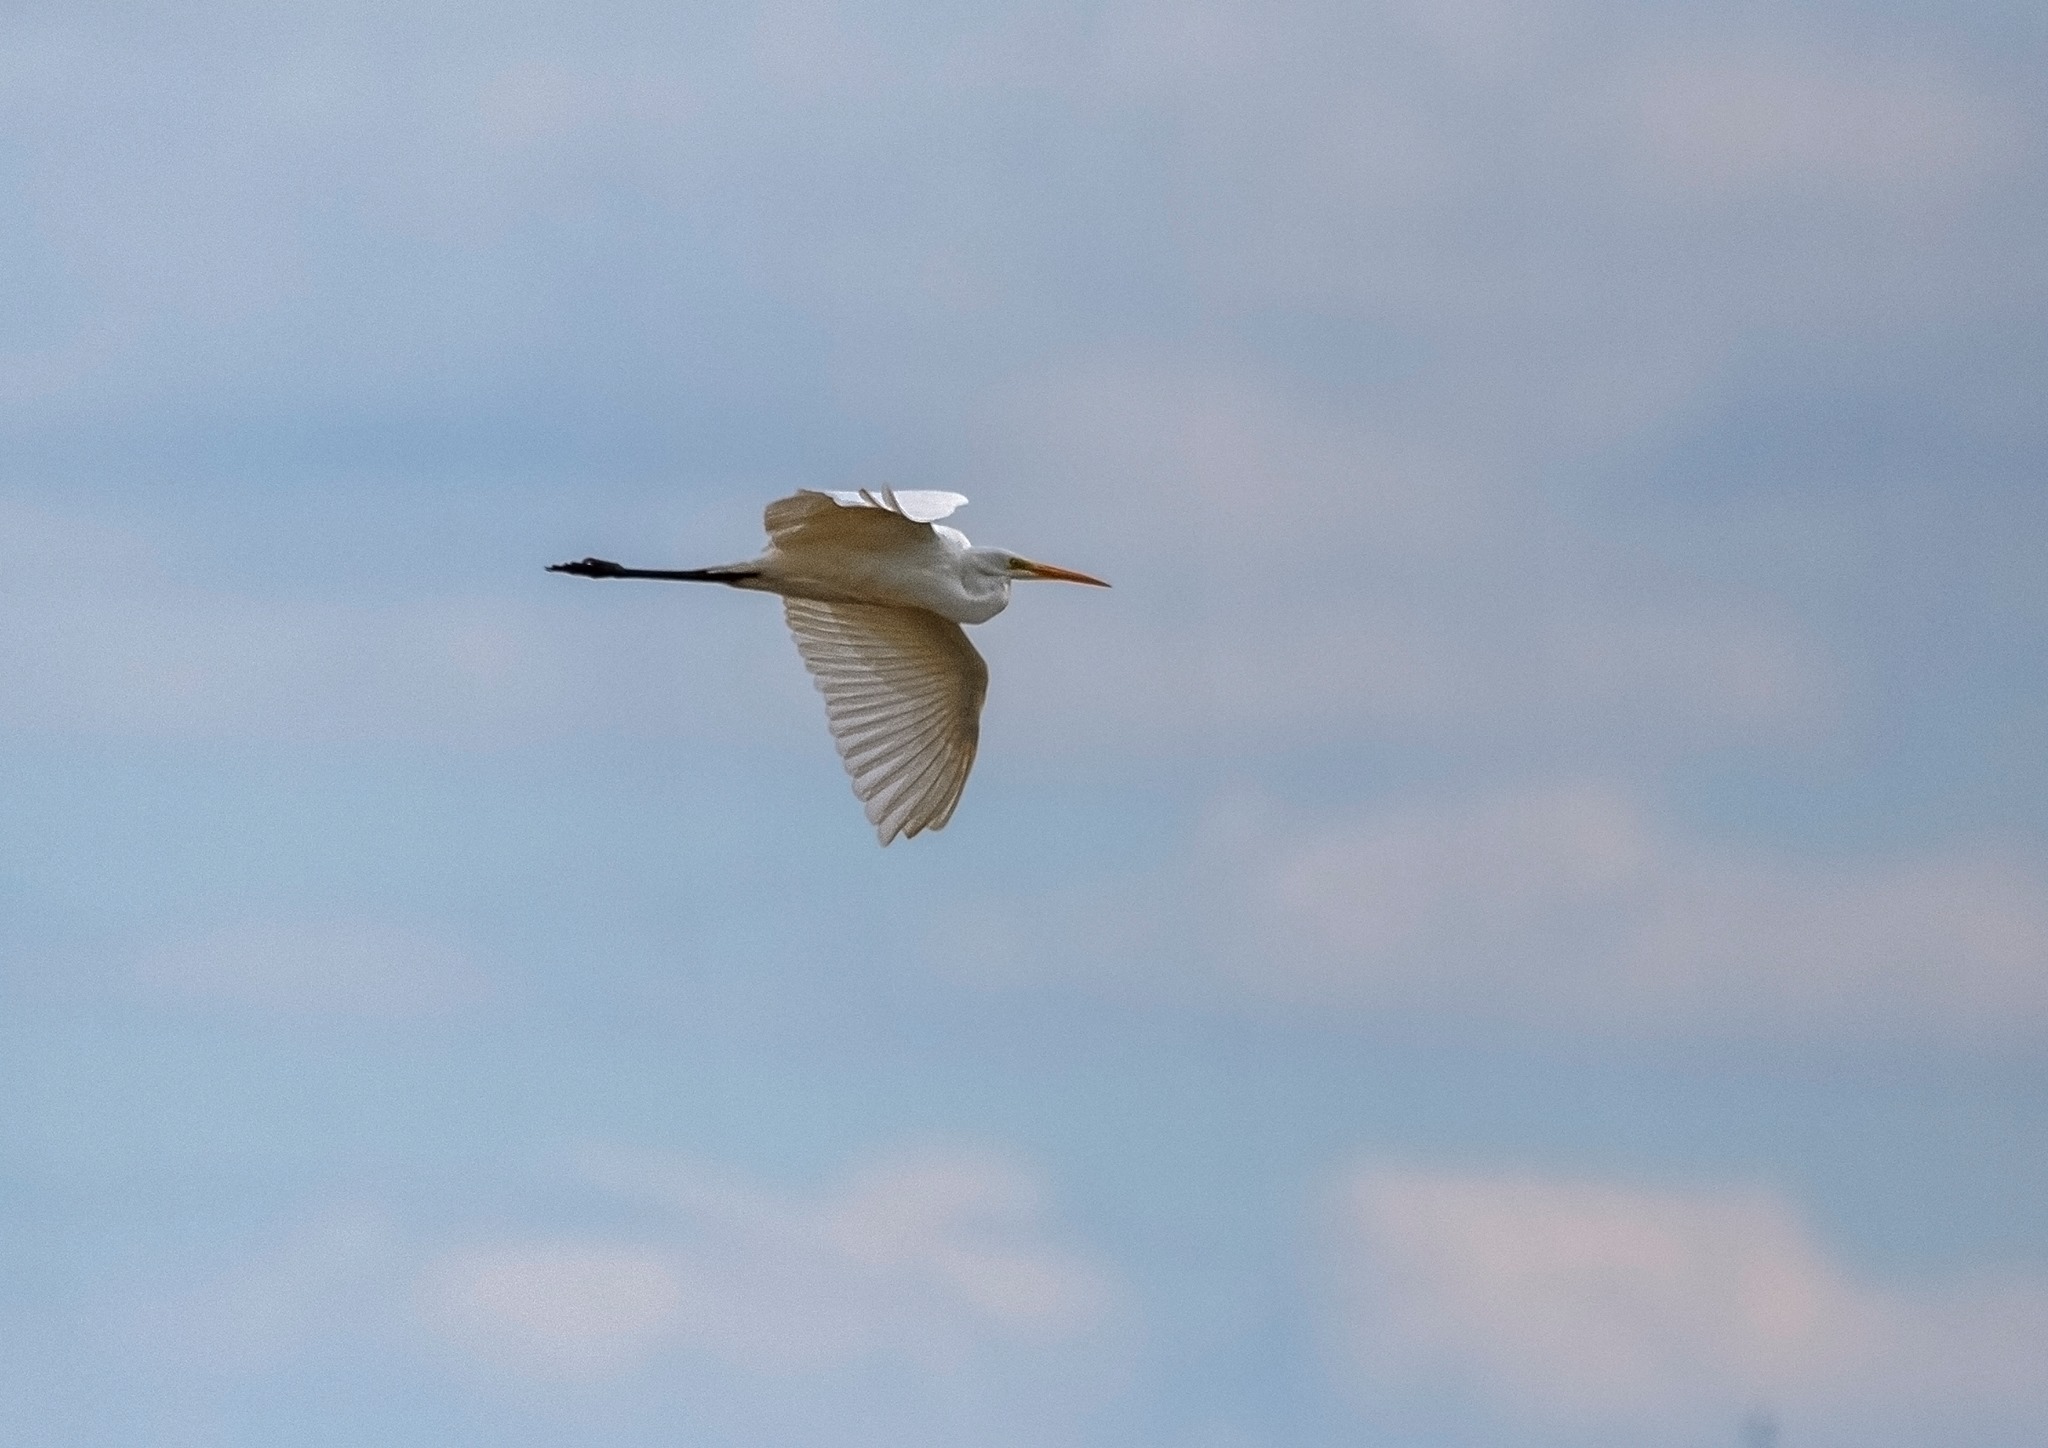 Great Egret flying over the Folly Pond. Photo taken by Alex Hillier